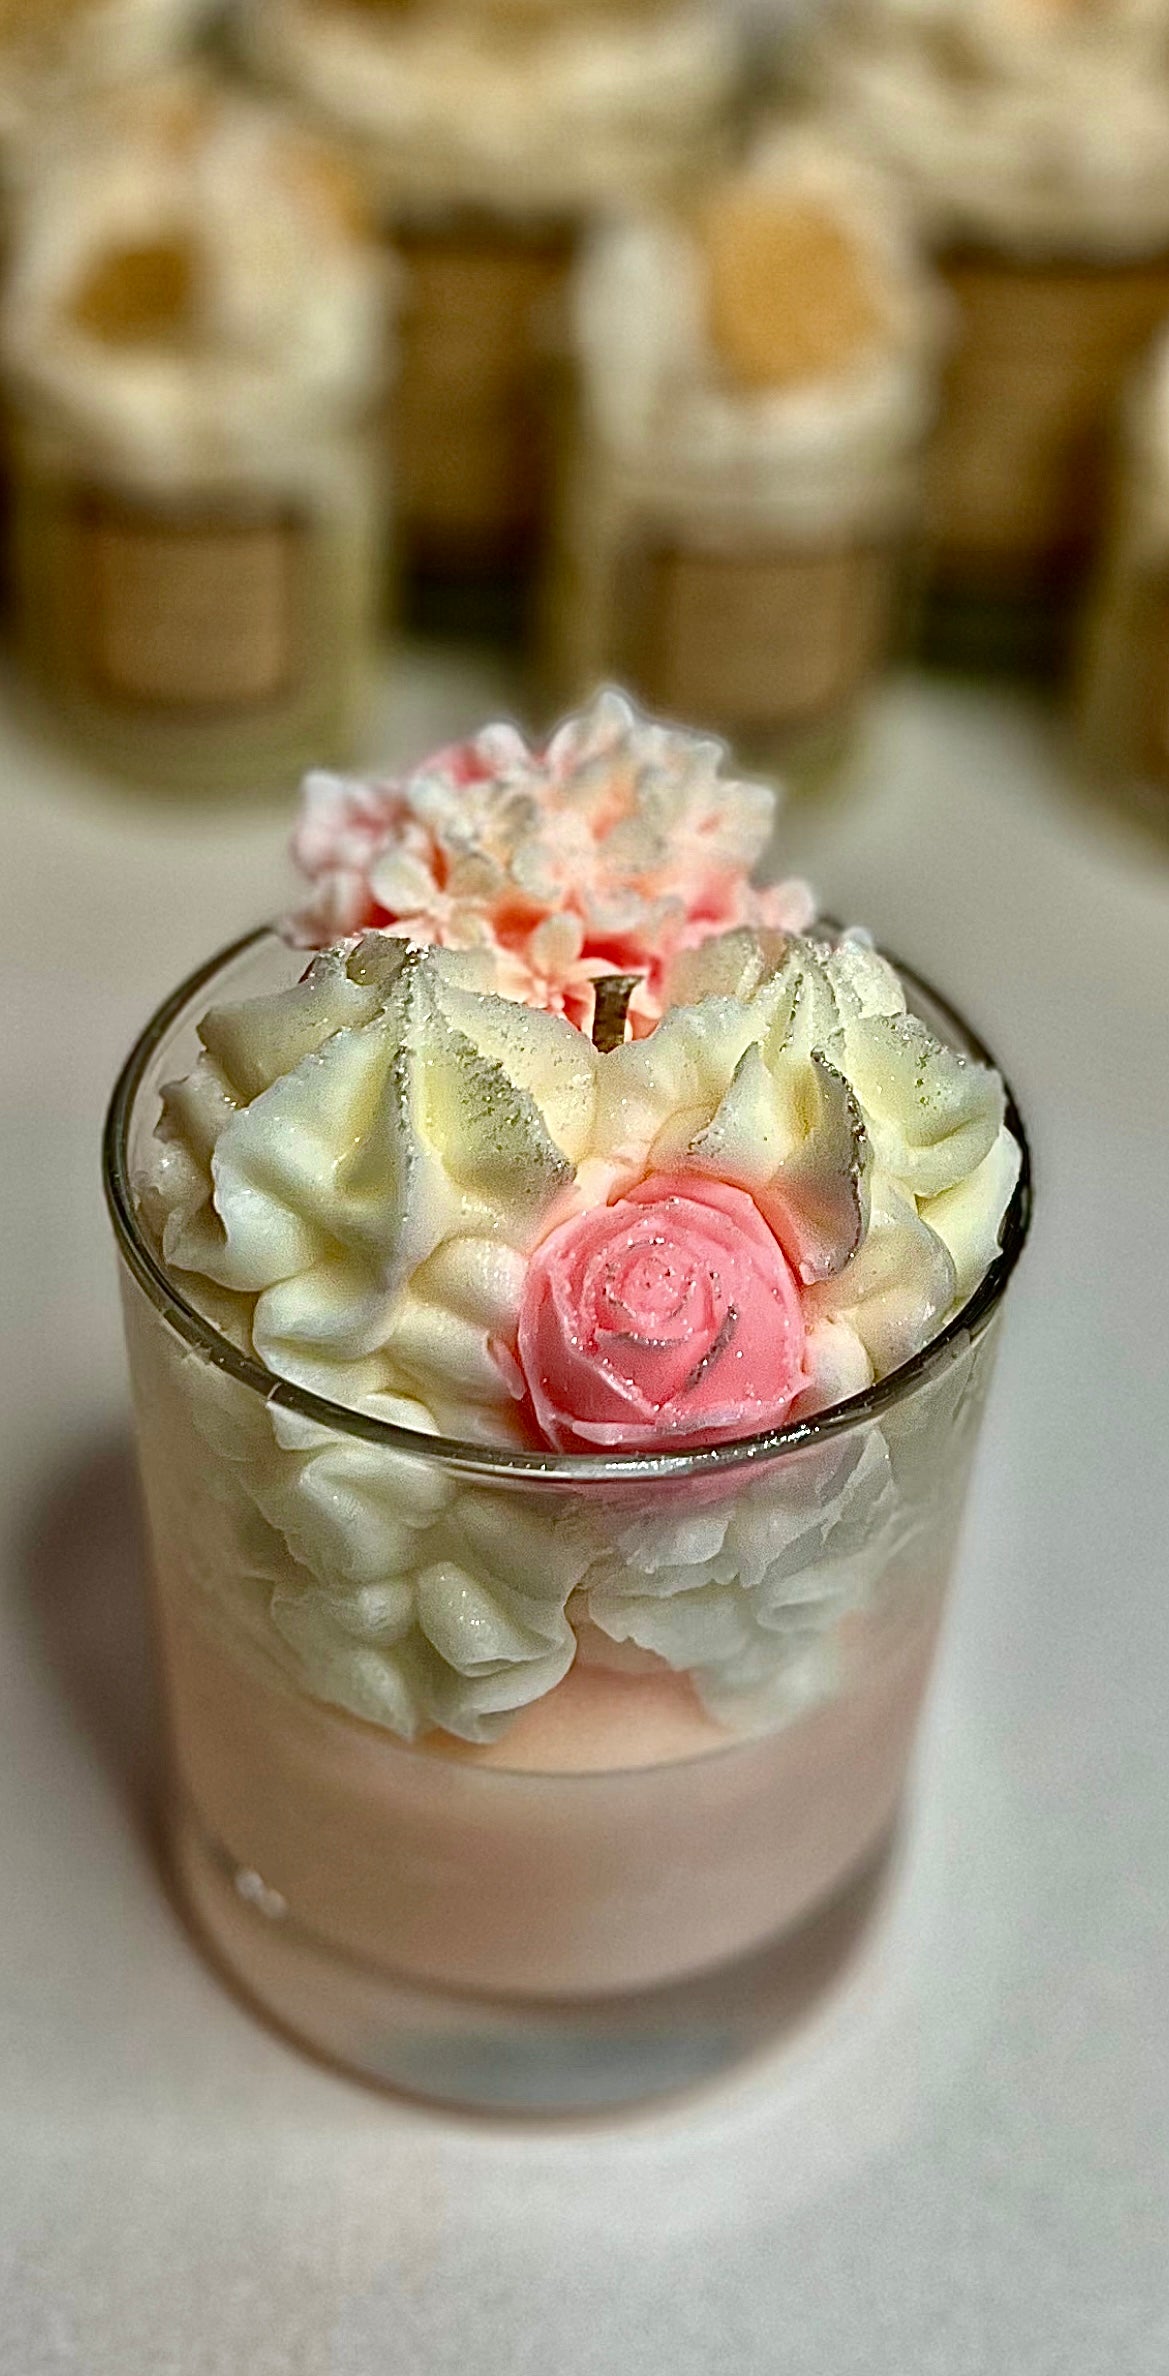 handmade dessert candle with whipped wax piping and wax melt embeds with snow angel parfum